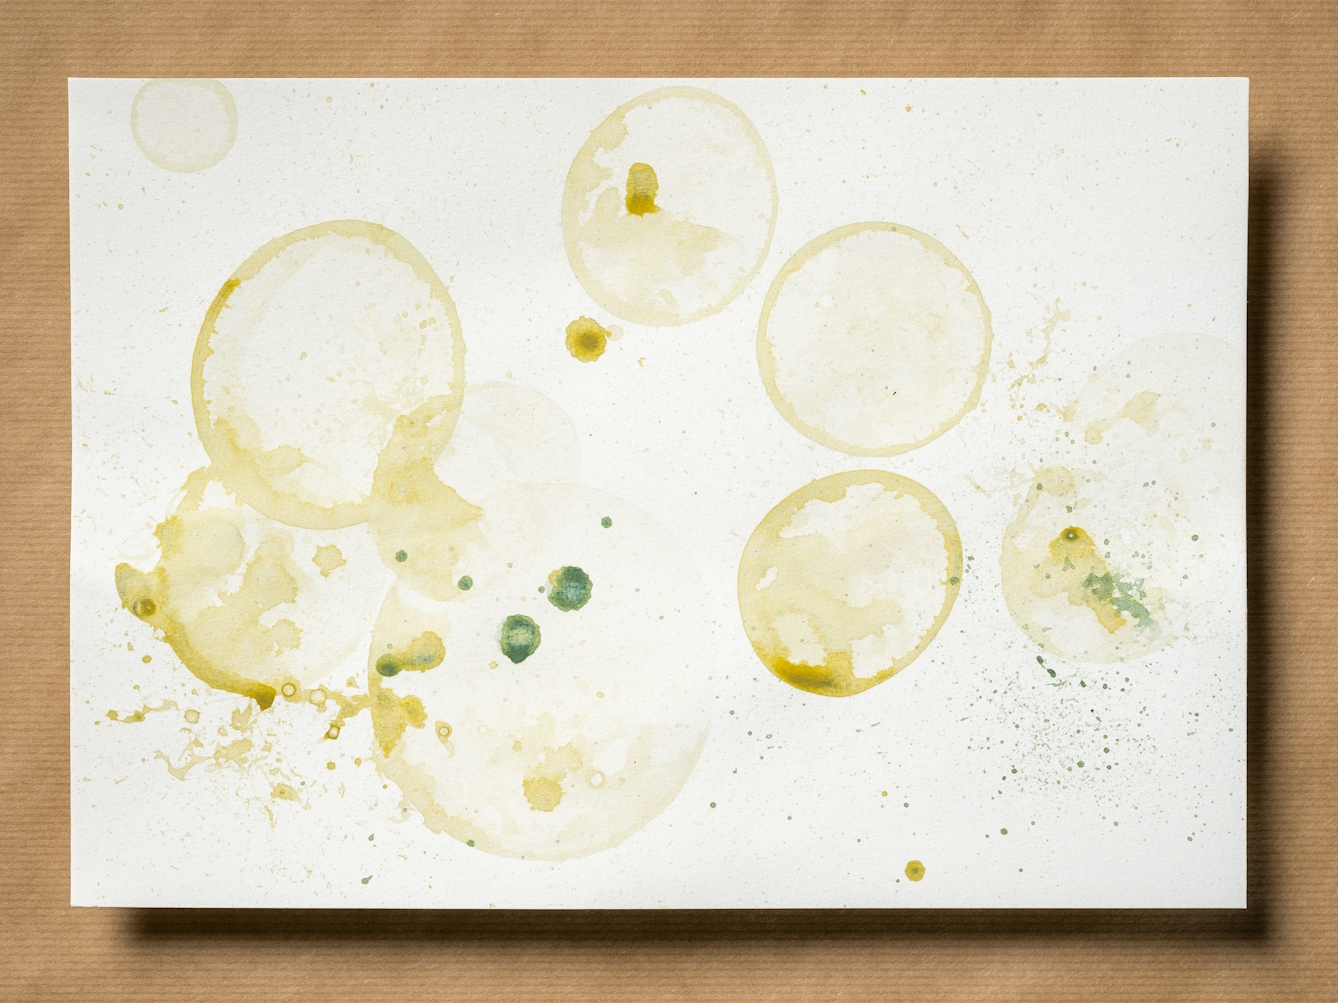 Photograph of an original artwork on watercolour paper. The artwork is resting on a brown parcel paper background. The artwork shows many varying in size droplet spatters and rings, made with coloured ink. The ink colours are dark and light greens and yellows. The spatters seem random in distribution.